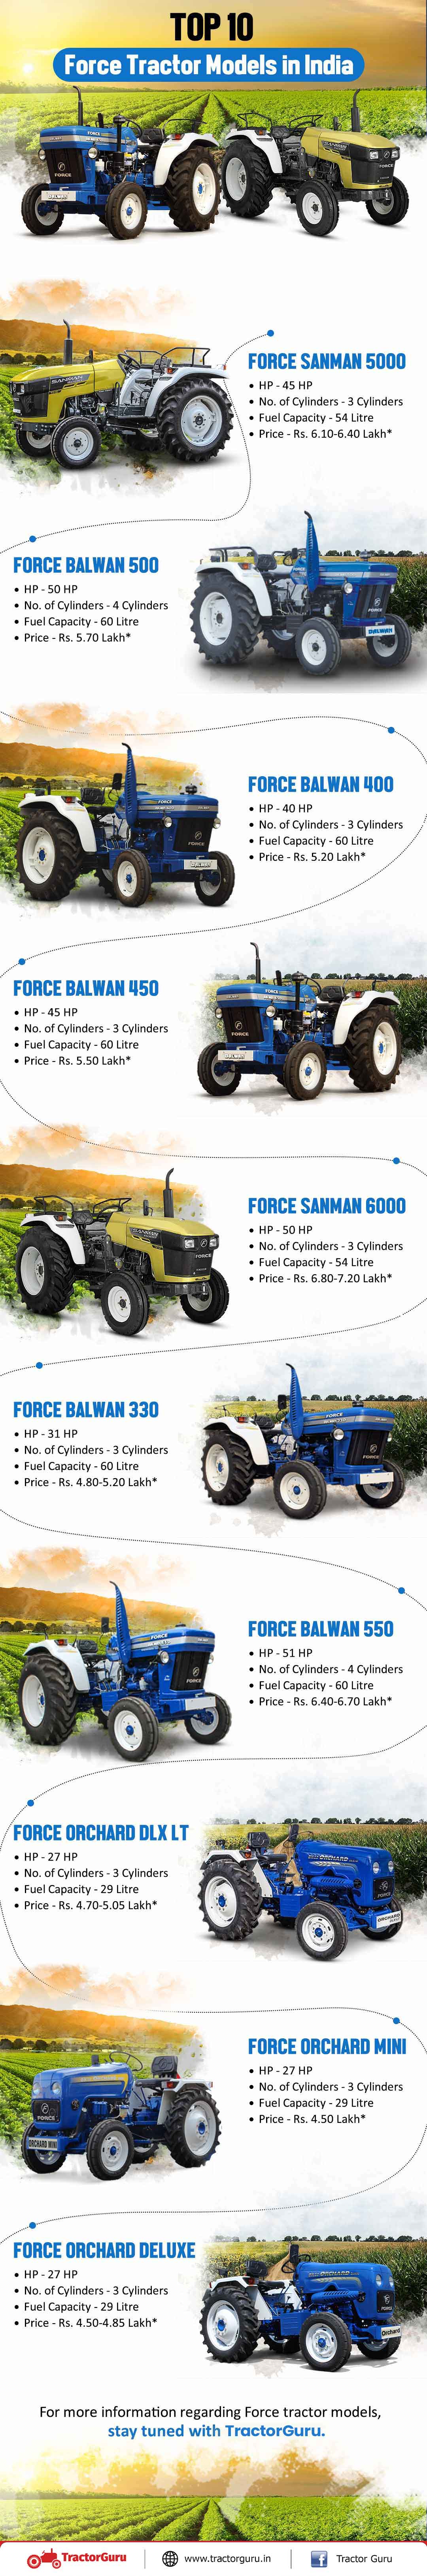 Top 10 Force Tractor Models in India